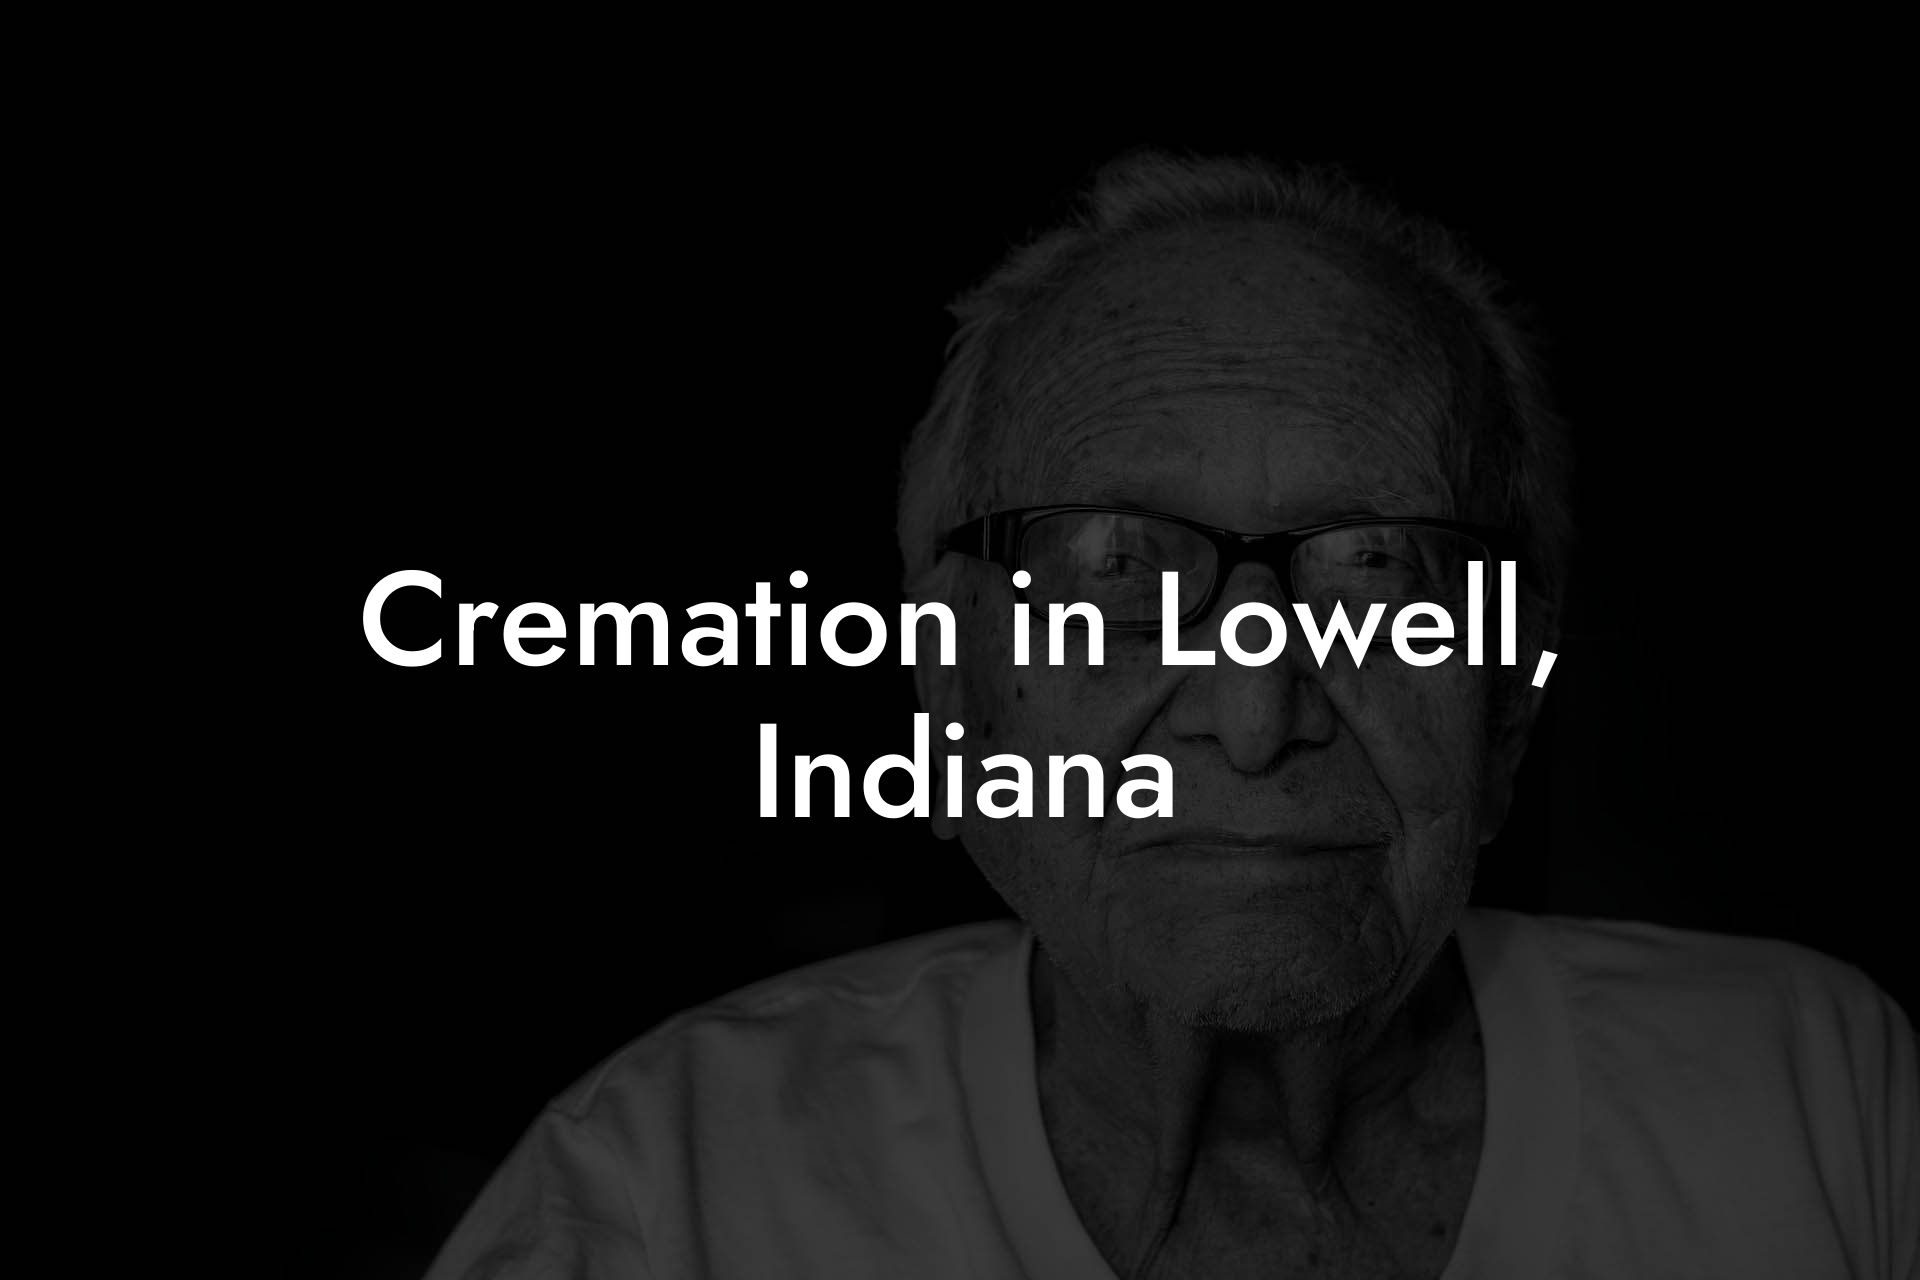 Cremation in Lowell, Indiana